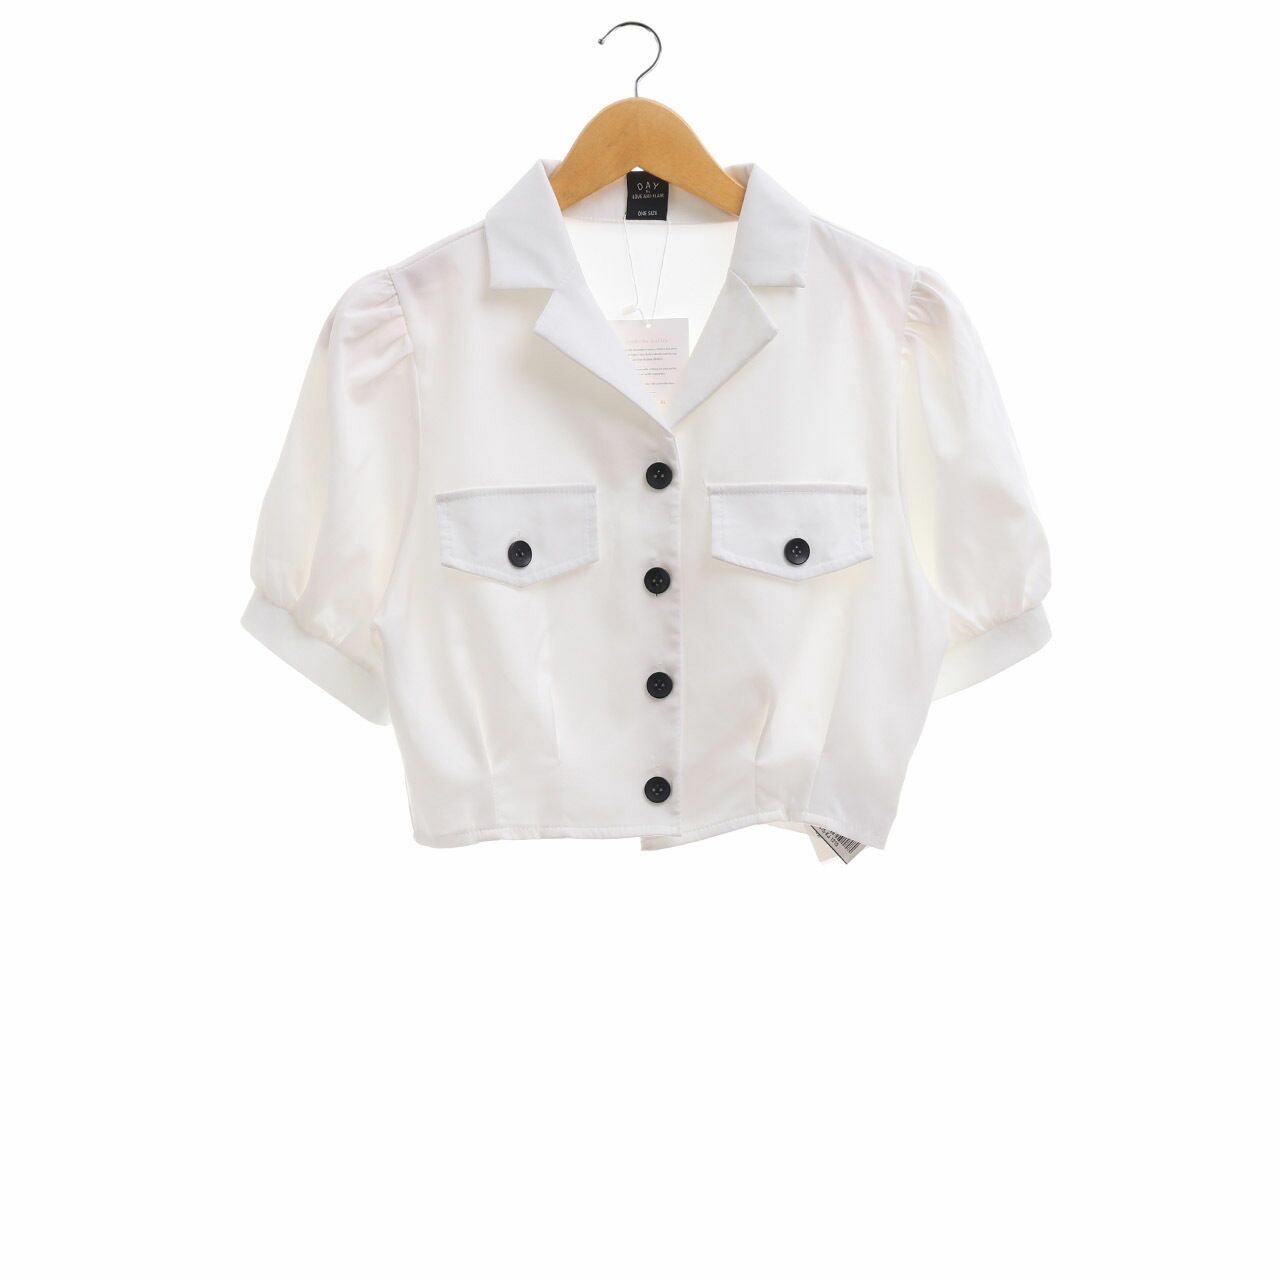 Day by Love And flair White Shirt